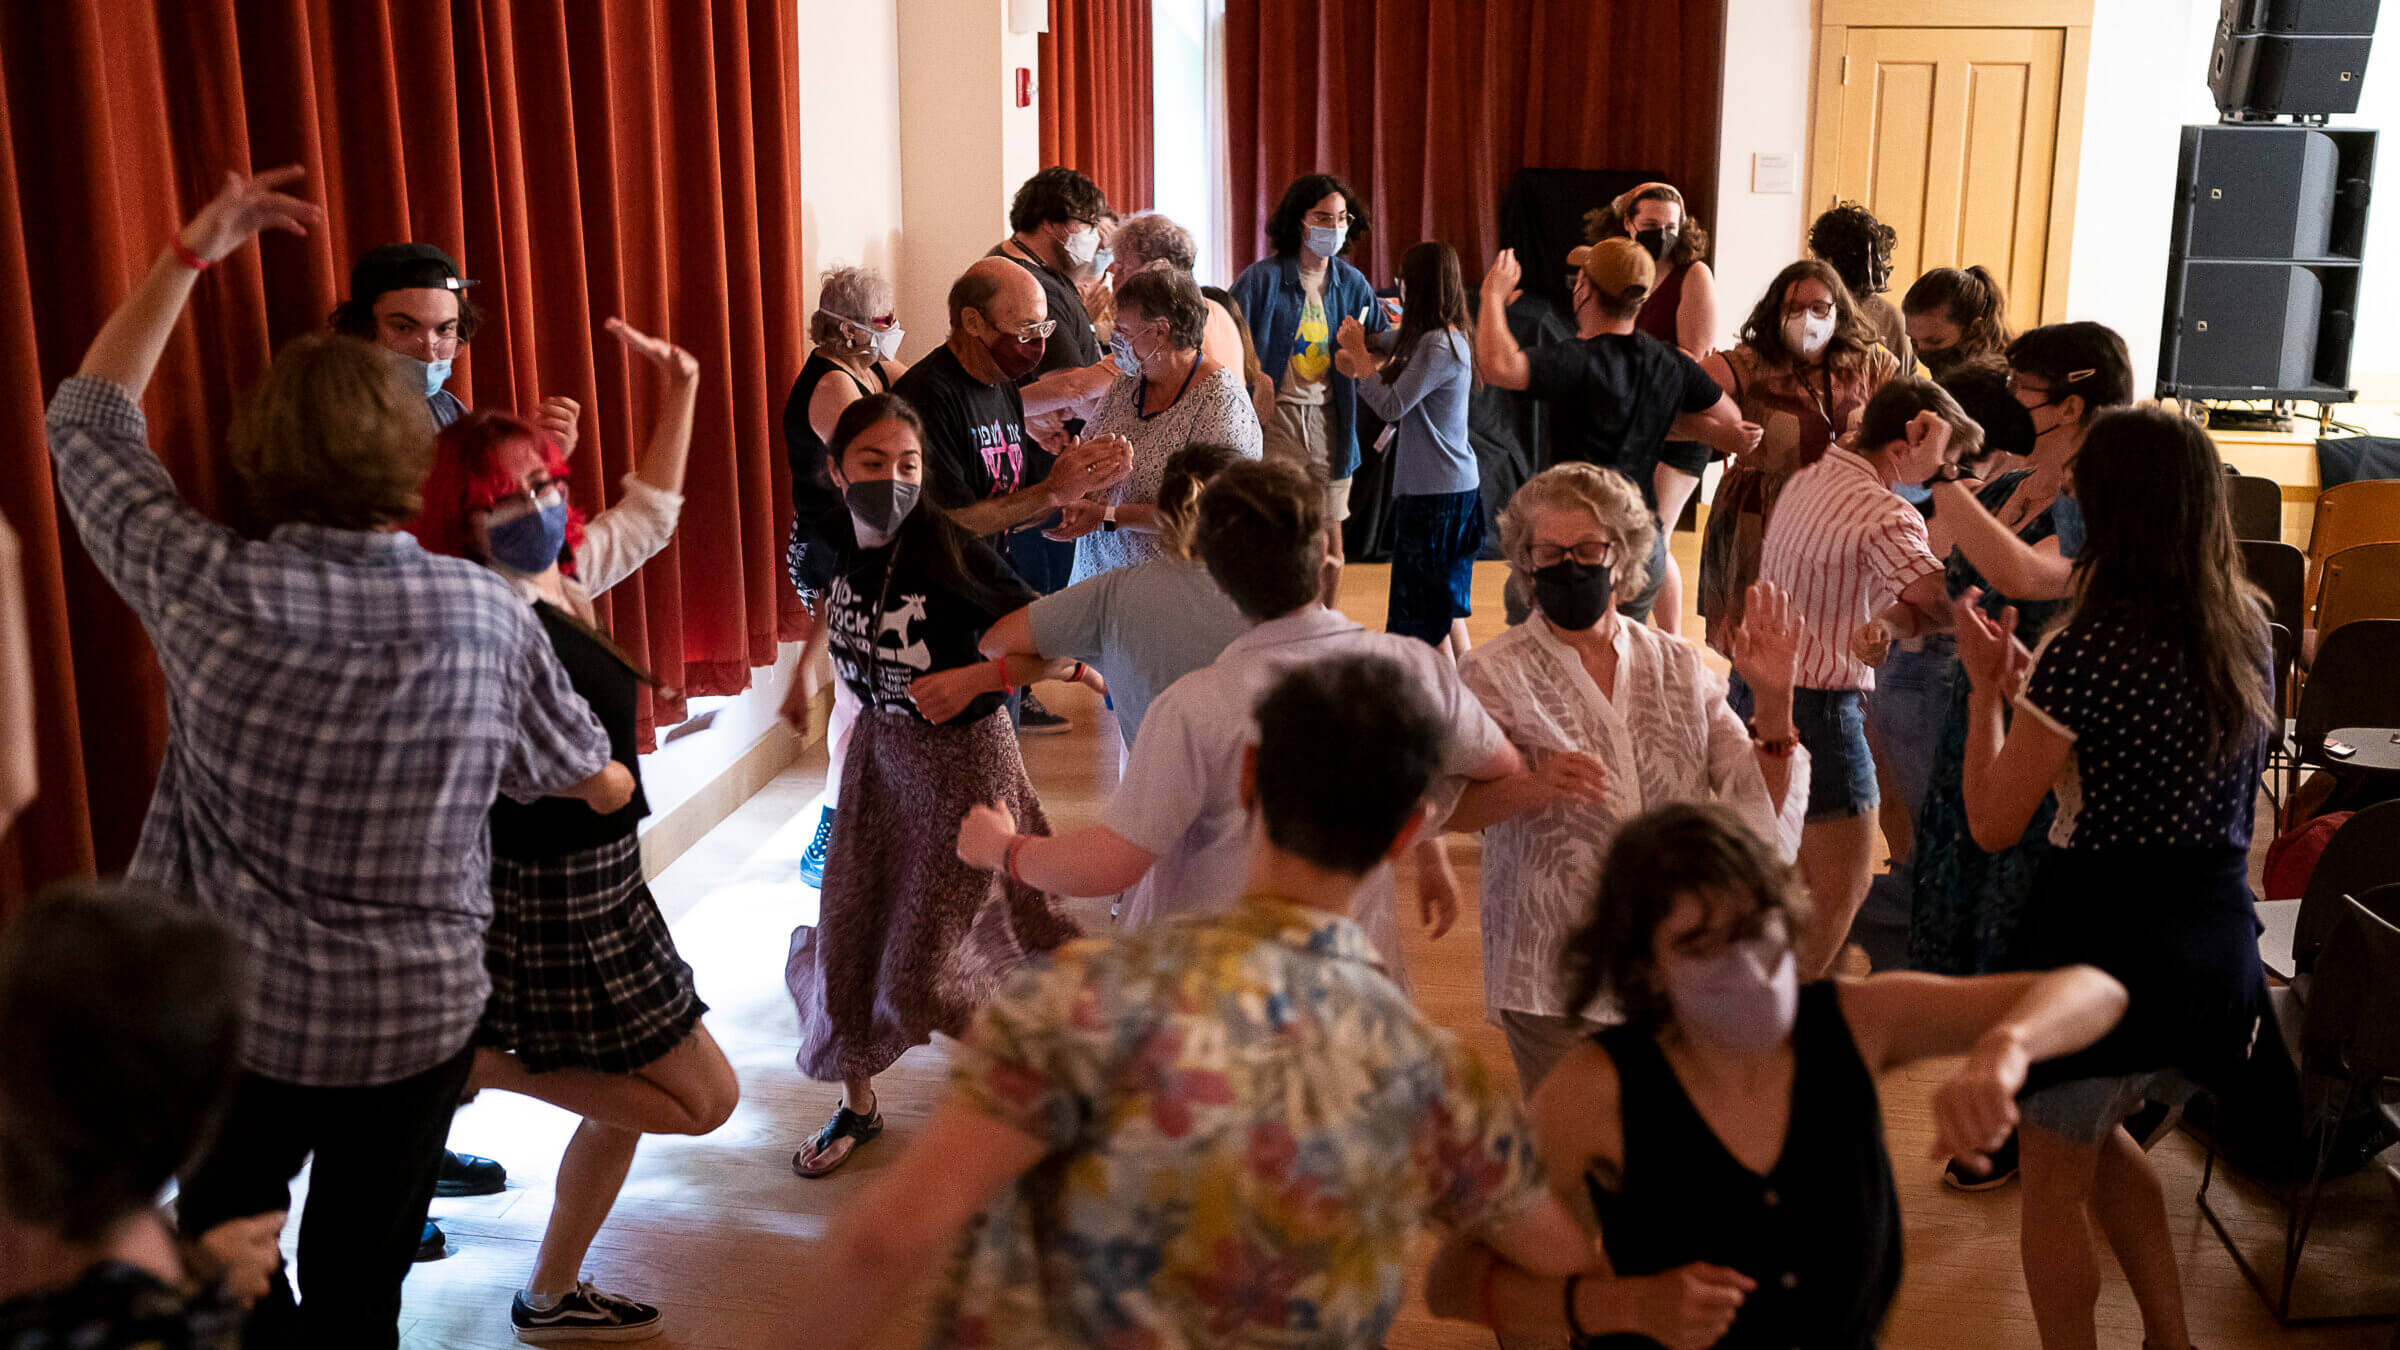 A group of people participating in a traditional Yiddish folk dance.